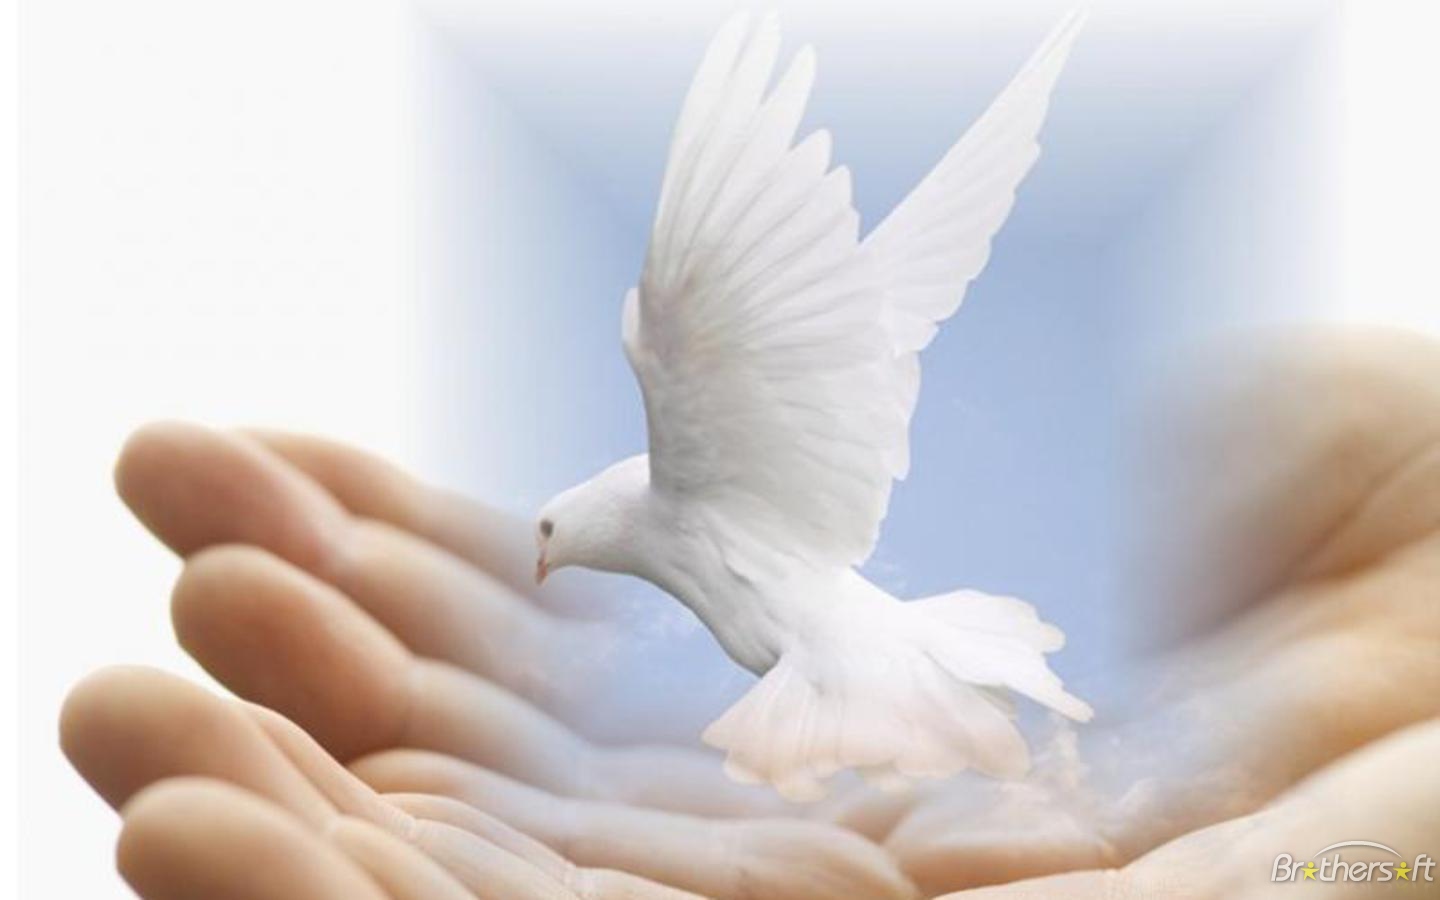 Dove of Peace peace and love revolution club 25246250 1440 900jpg